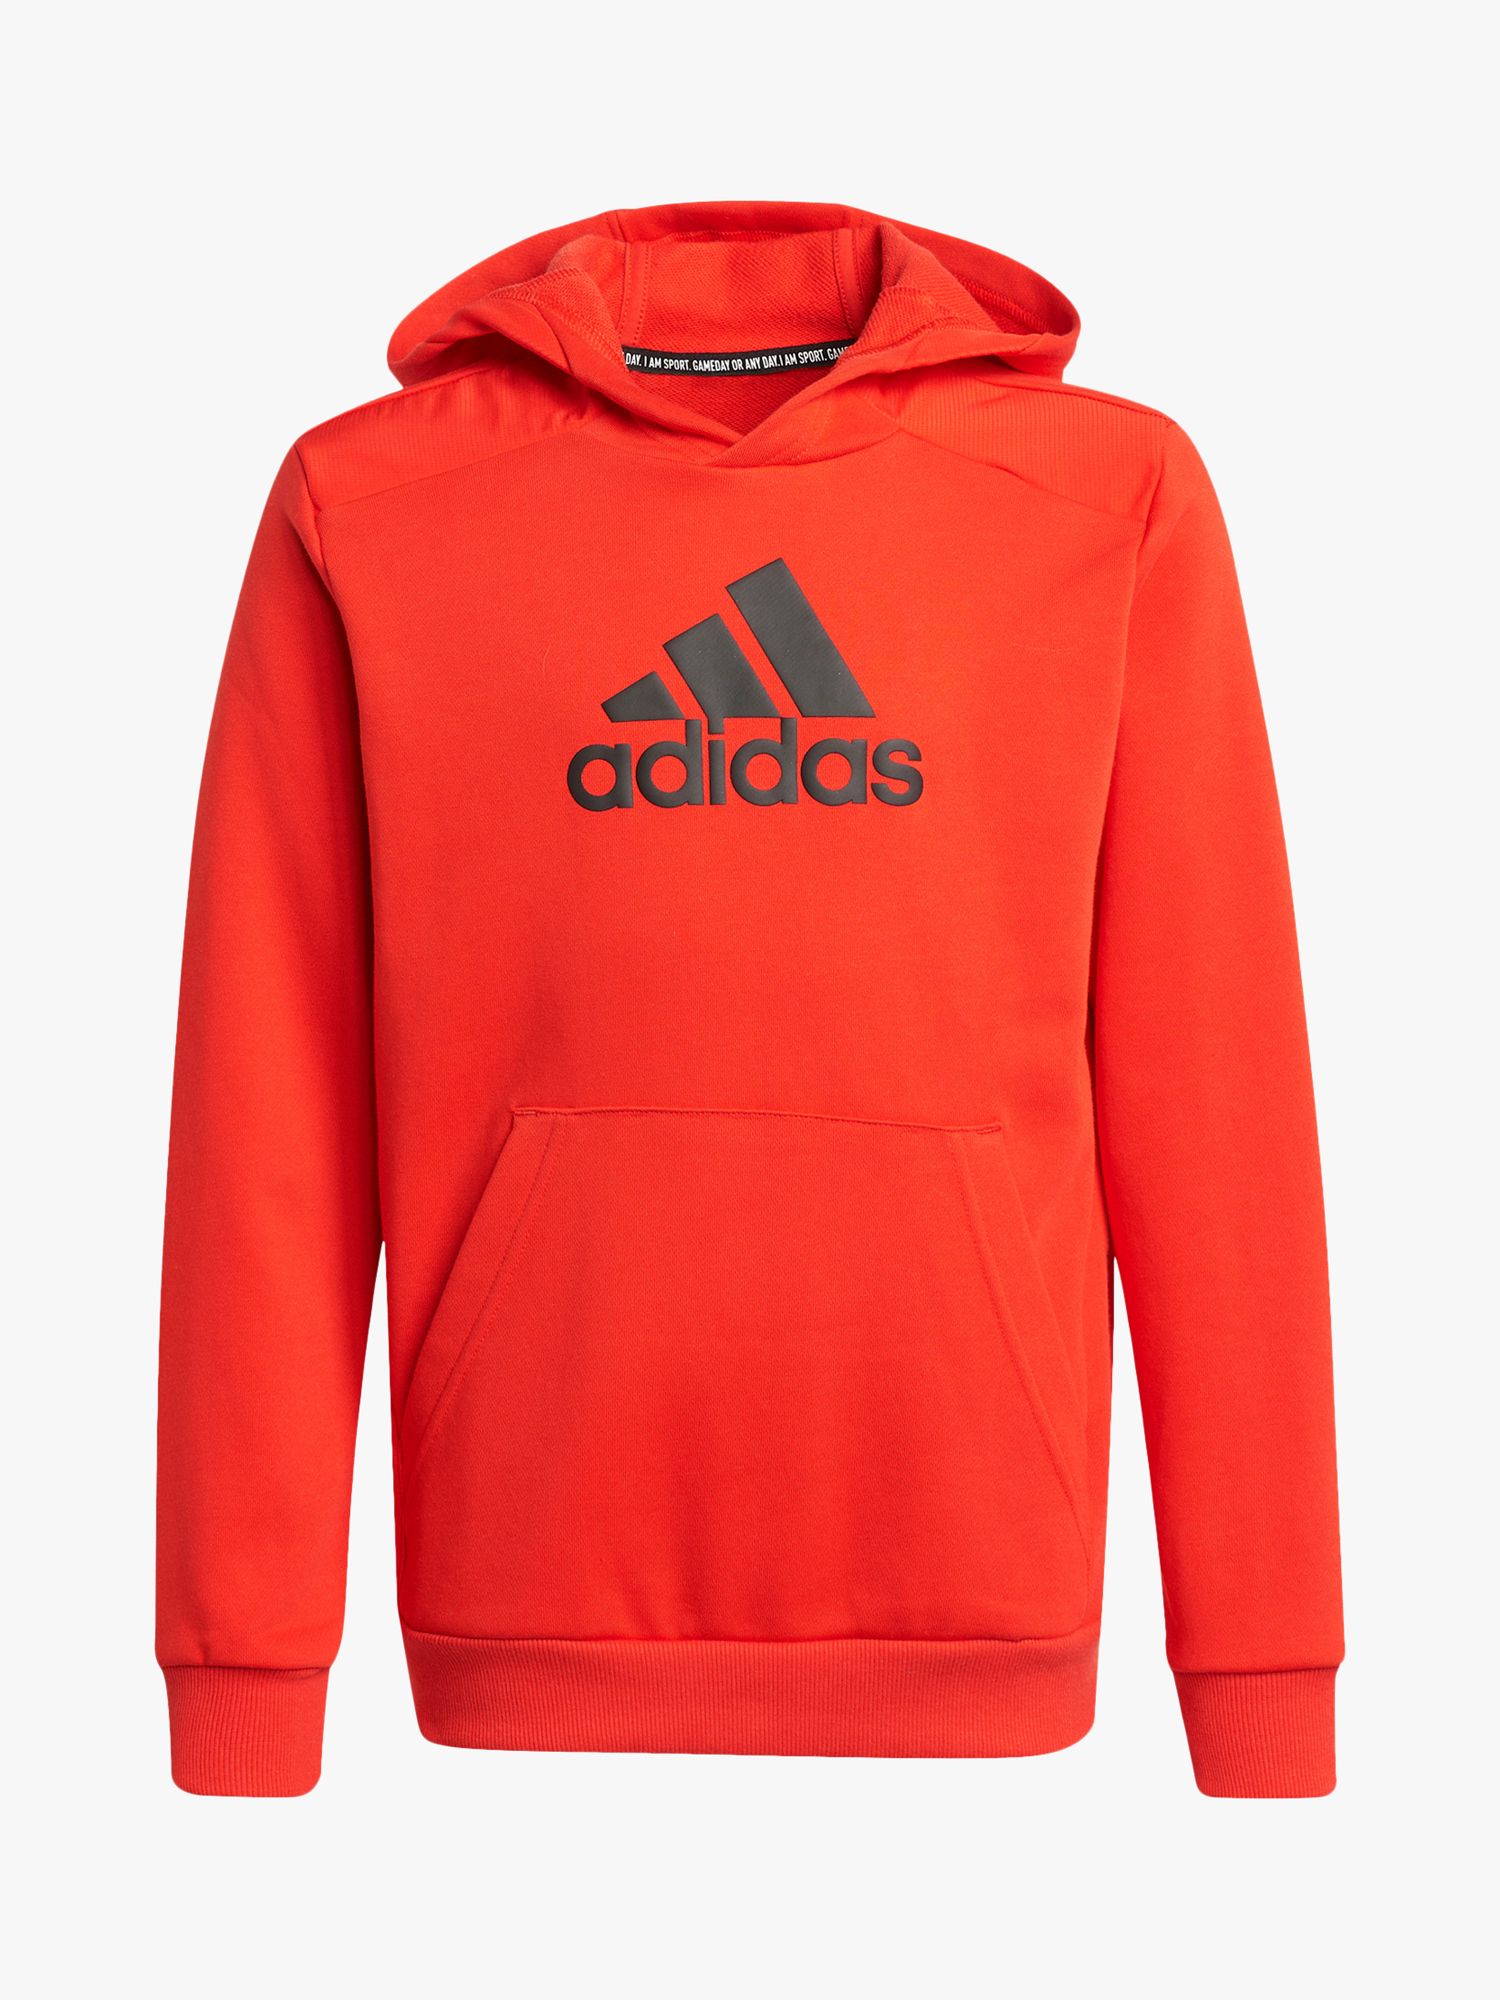 adidas Kids' B Bos Pull Over Hoodie Vivid Red/Black 15-16 years unisex 70% cotton, 30% recycled polyester